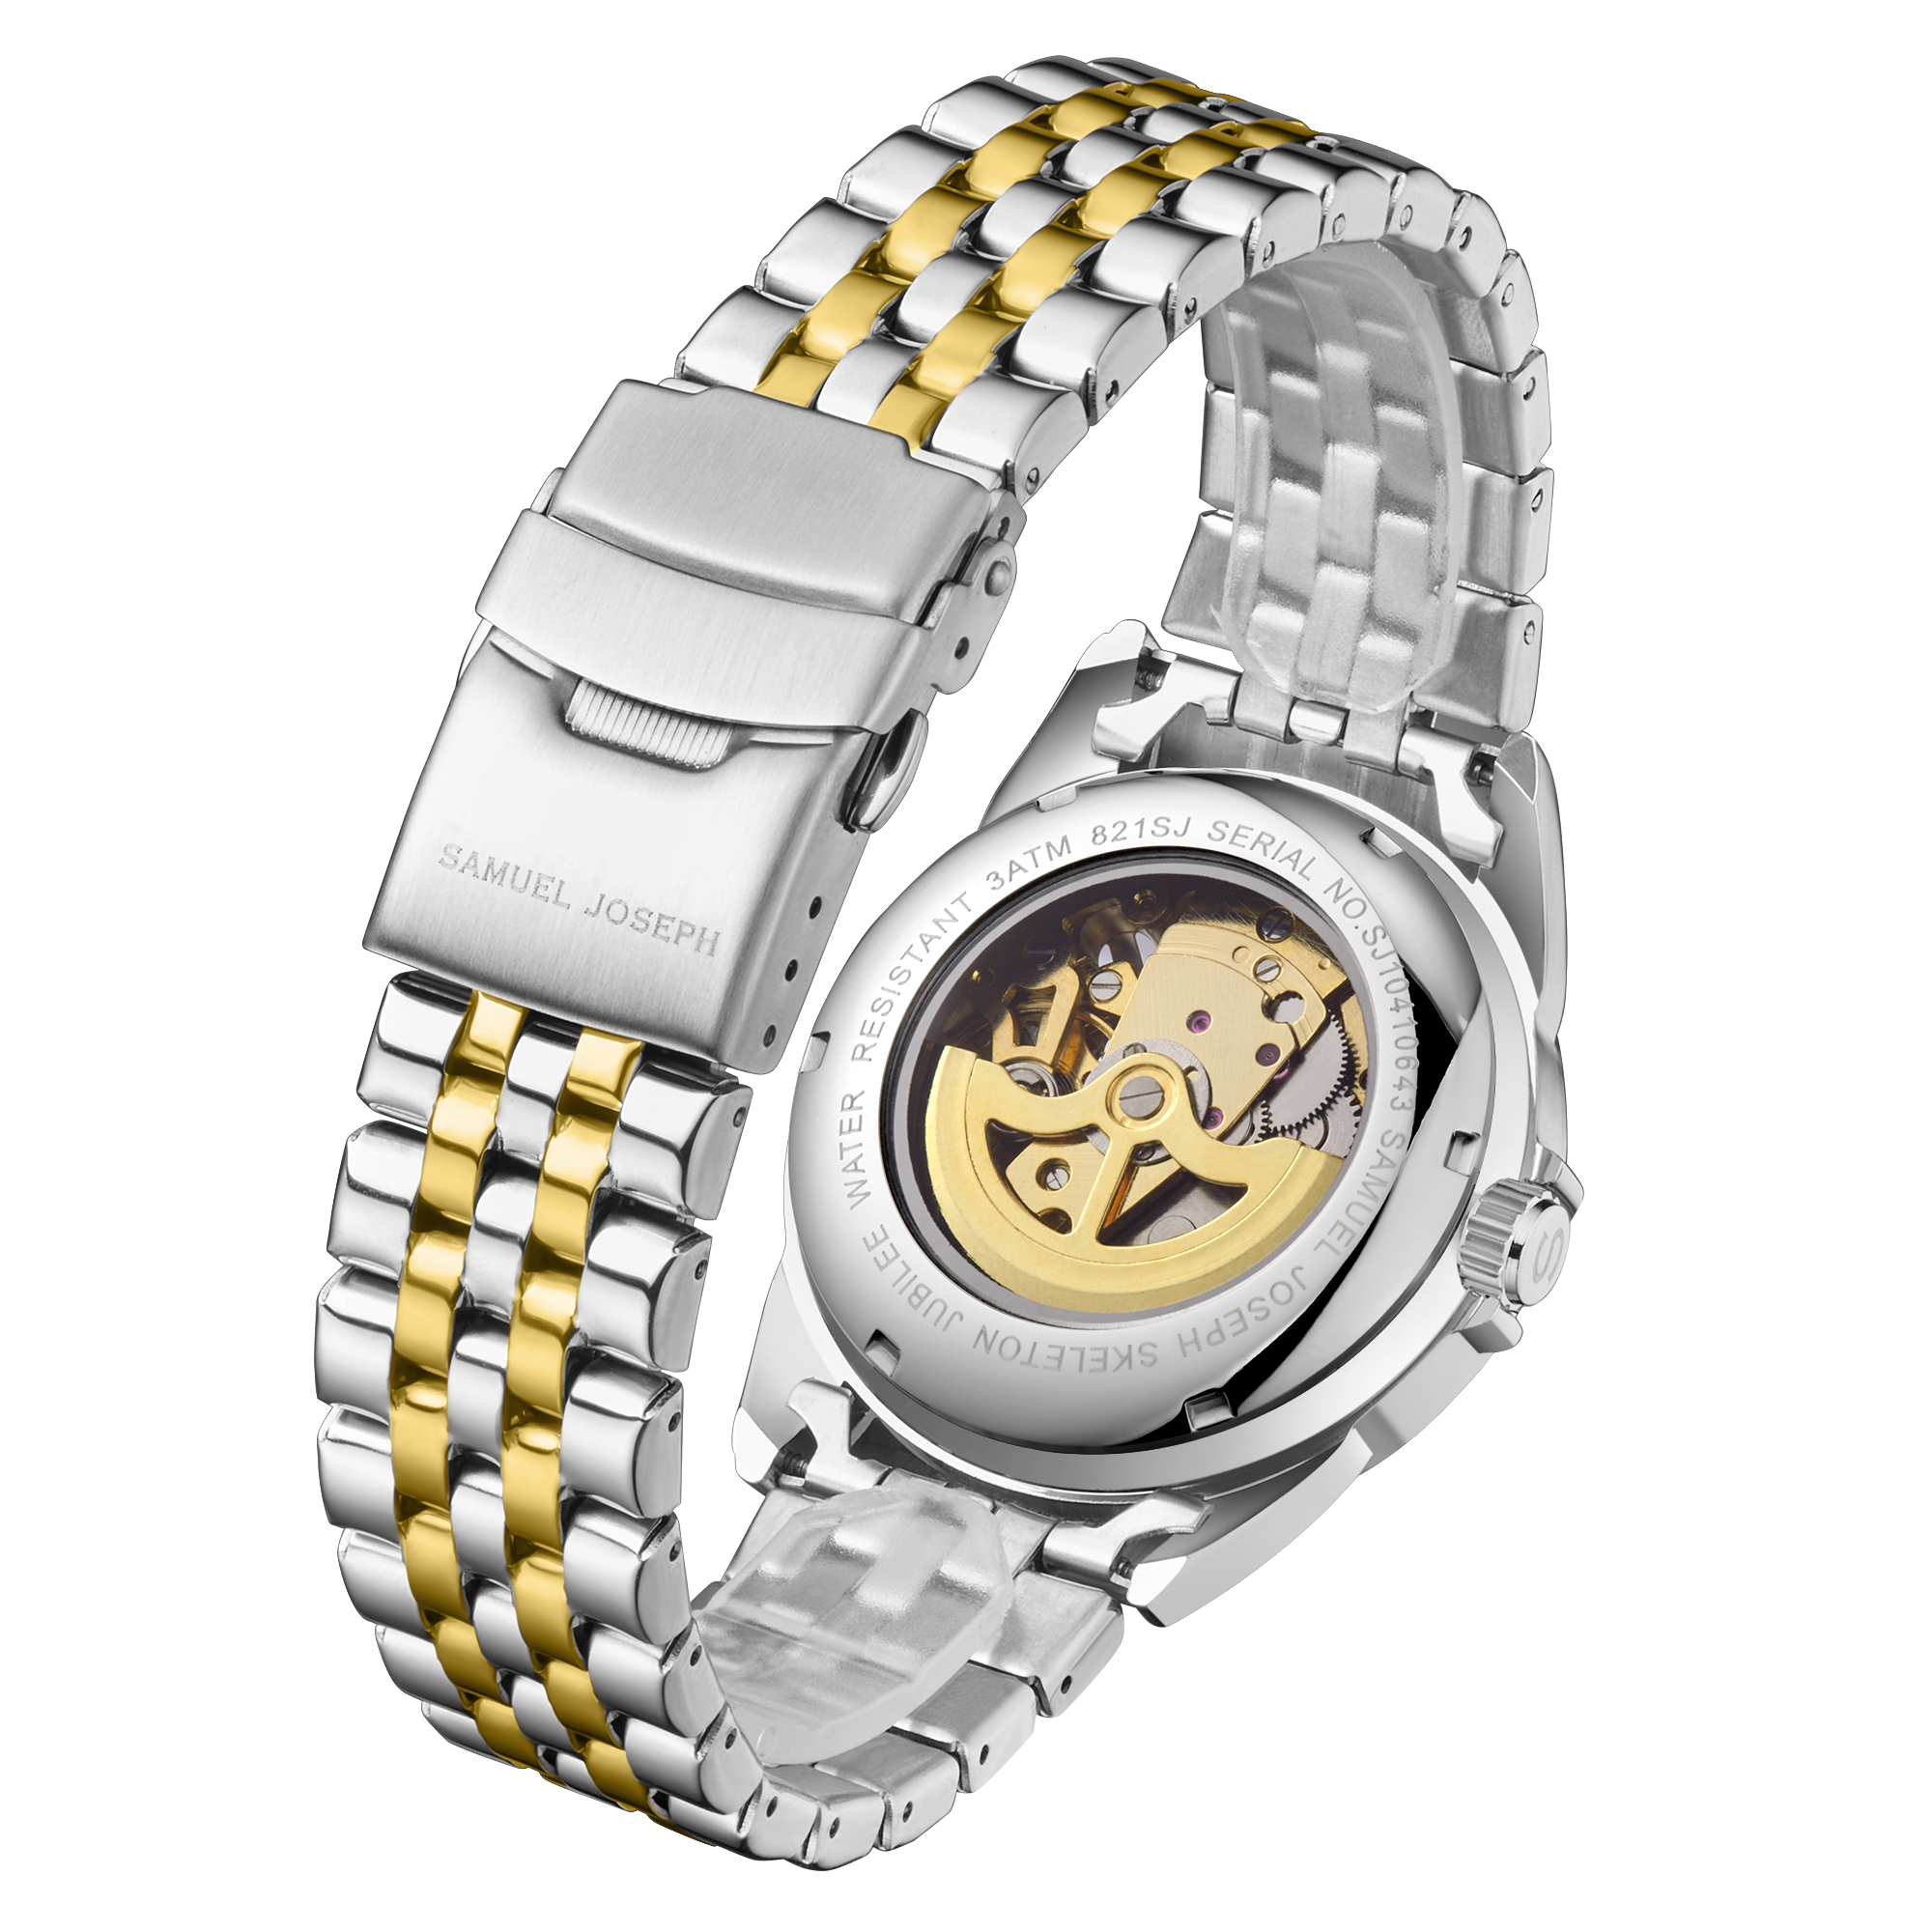 Samuel Joseph Limited Edition Skeleton Jubilee Two Tone Watch - Free Delivery & 2 Year Warranty - Image 3 of 5